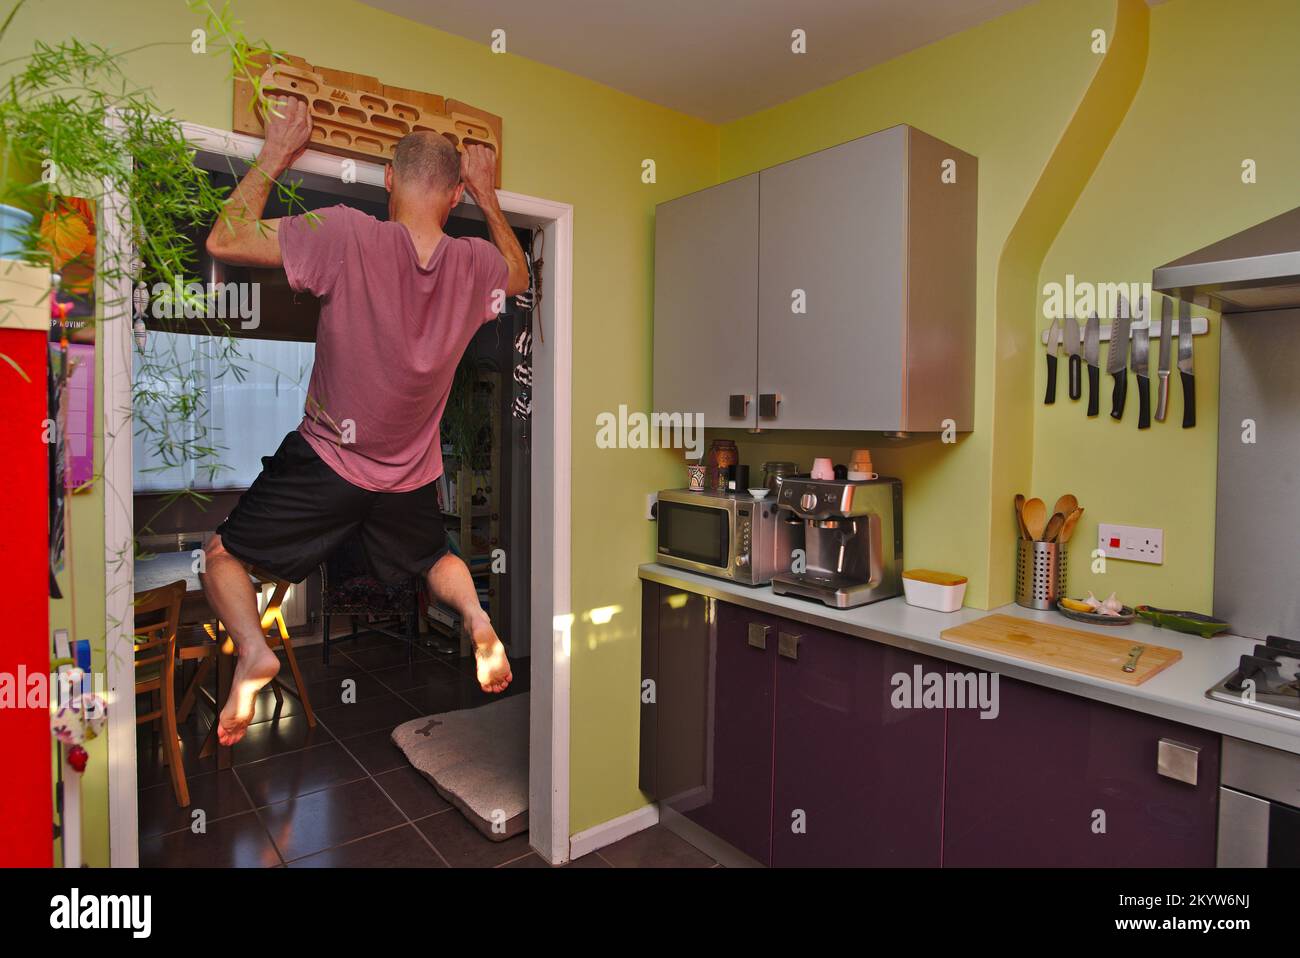 Man strength training at home using a fingerboard in his kitchen. Stock Photo